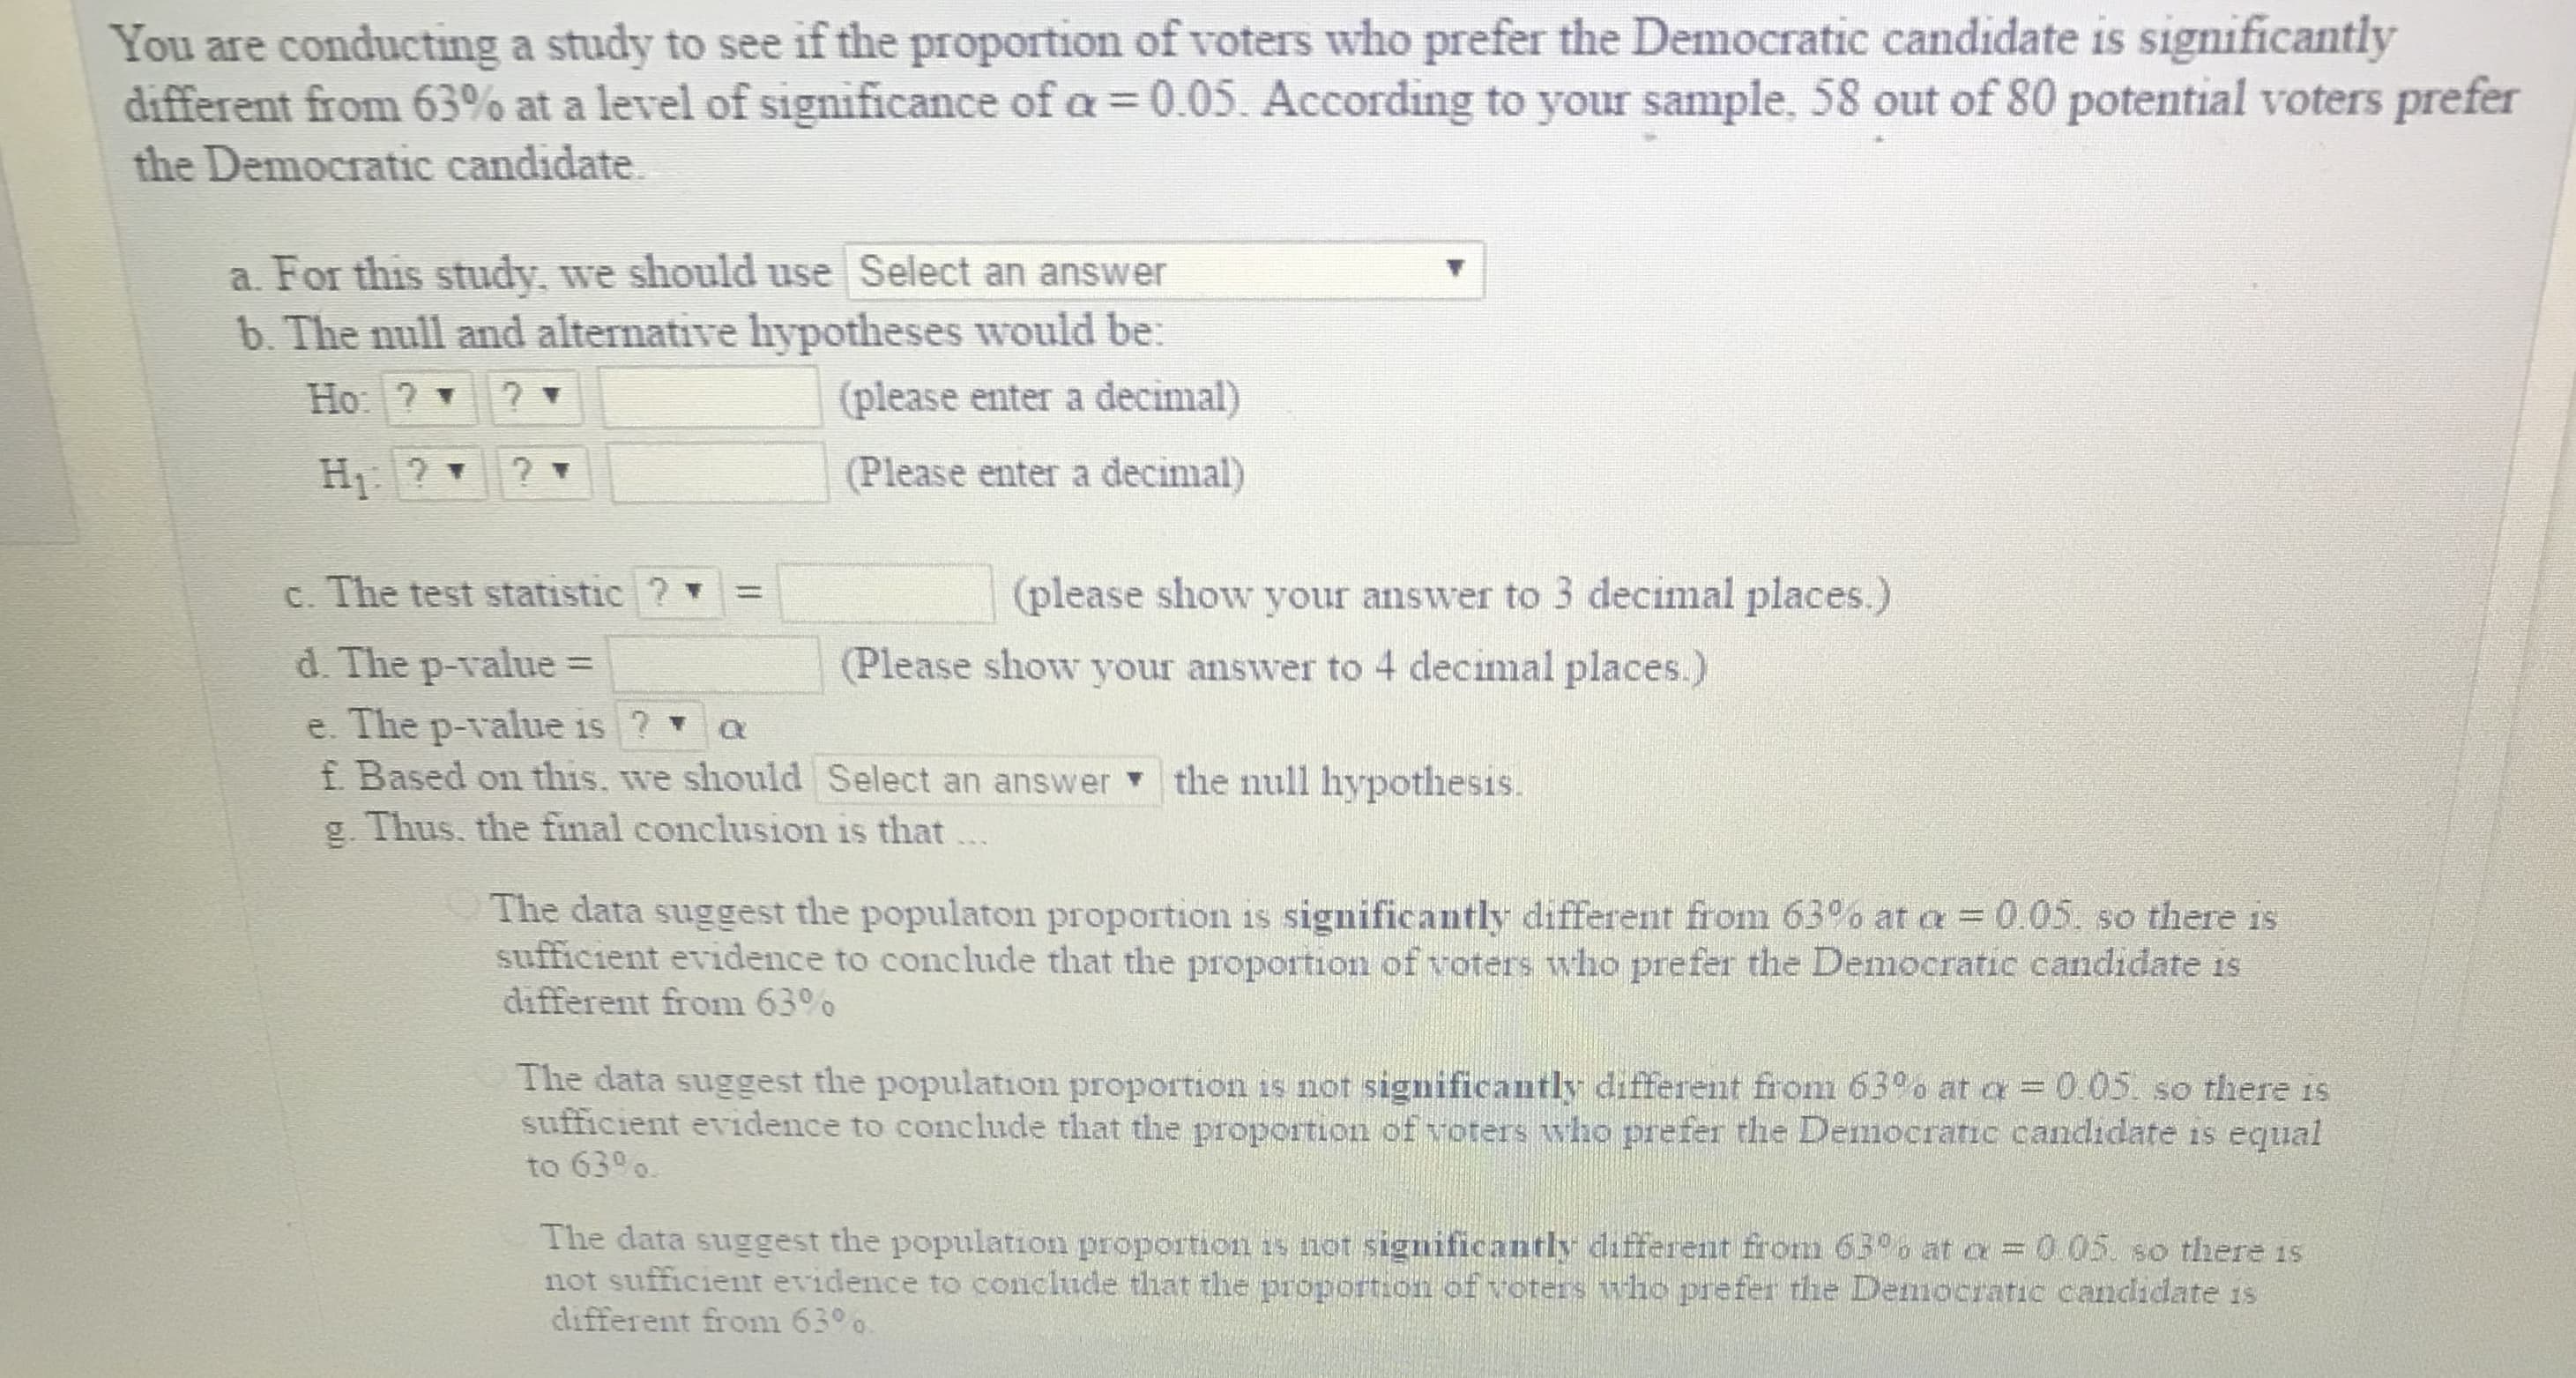 You are conducting a study to see if the proportion of voters who prefer the Democratic candidate is significantly
different from 63% at a level of significance of 0.05. According to your sample, 58 out of 80 potential voters prefer
the Democratic candidate
a. For this study, we should use Select an answer
b. The null and alternative hypotheses would be:
(please enter a decimal)
(Please enter a decimal)
c. The test statistic ? '
(please show your answer to 3 decimal places)
d. The p-value
Please show your answer to 4 decimal places.)
e. The p-value is? a
f Based on this. we should select an answer-the null hypothesis.
g. Thus. the final conclusion is that
The data suggest the populaton proportion is significantly different from 63% at a-005, so there is
sufficient evidence to conclude that the proportion of voters who prefer the Democratic candidate is
different from 63%
The data suggest the population proportion is not significantly different from 63% at α-005 so there is
sufficient evidence to conclude that the proportion of voters who prefer the Democratic candidate is equal
to 630o
The data suggest the population proportion is not significantly different from 63% at α
05 so tnere is
not sufficient evidence to conclude that the proportion of voters who prefer the Democratic candidate is
different from 6300.
